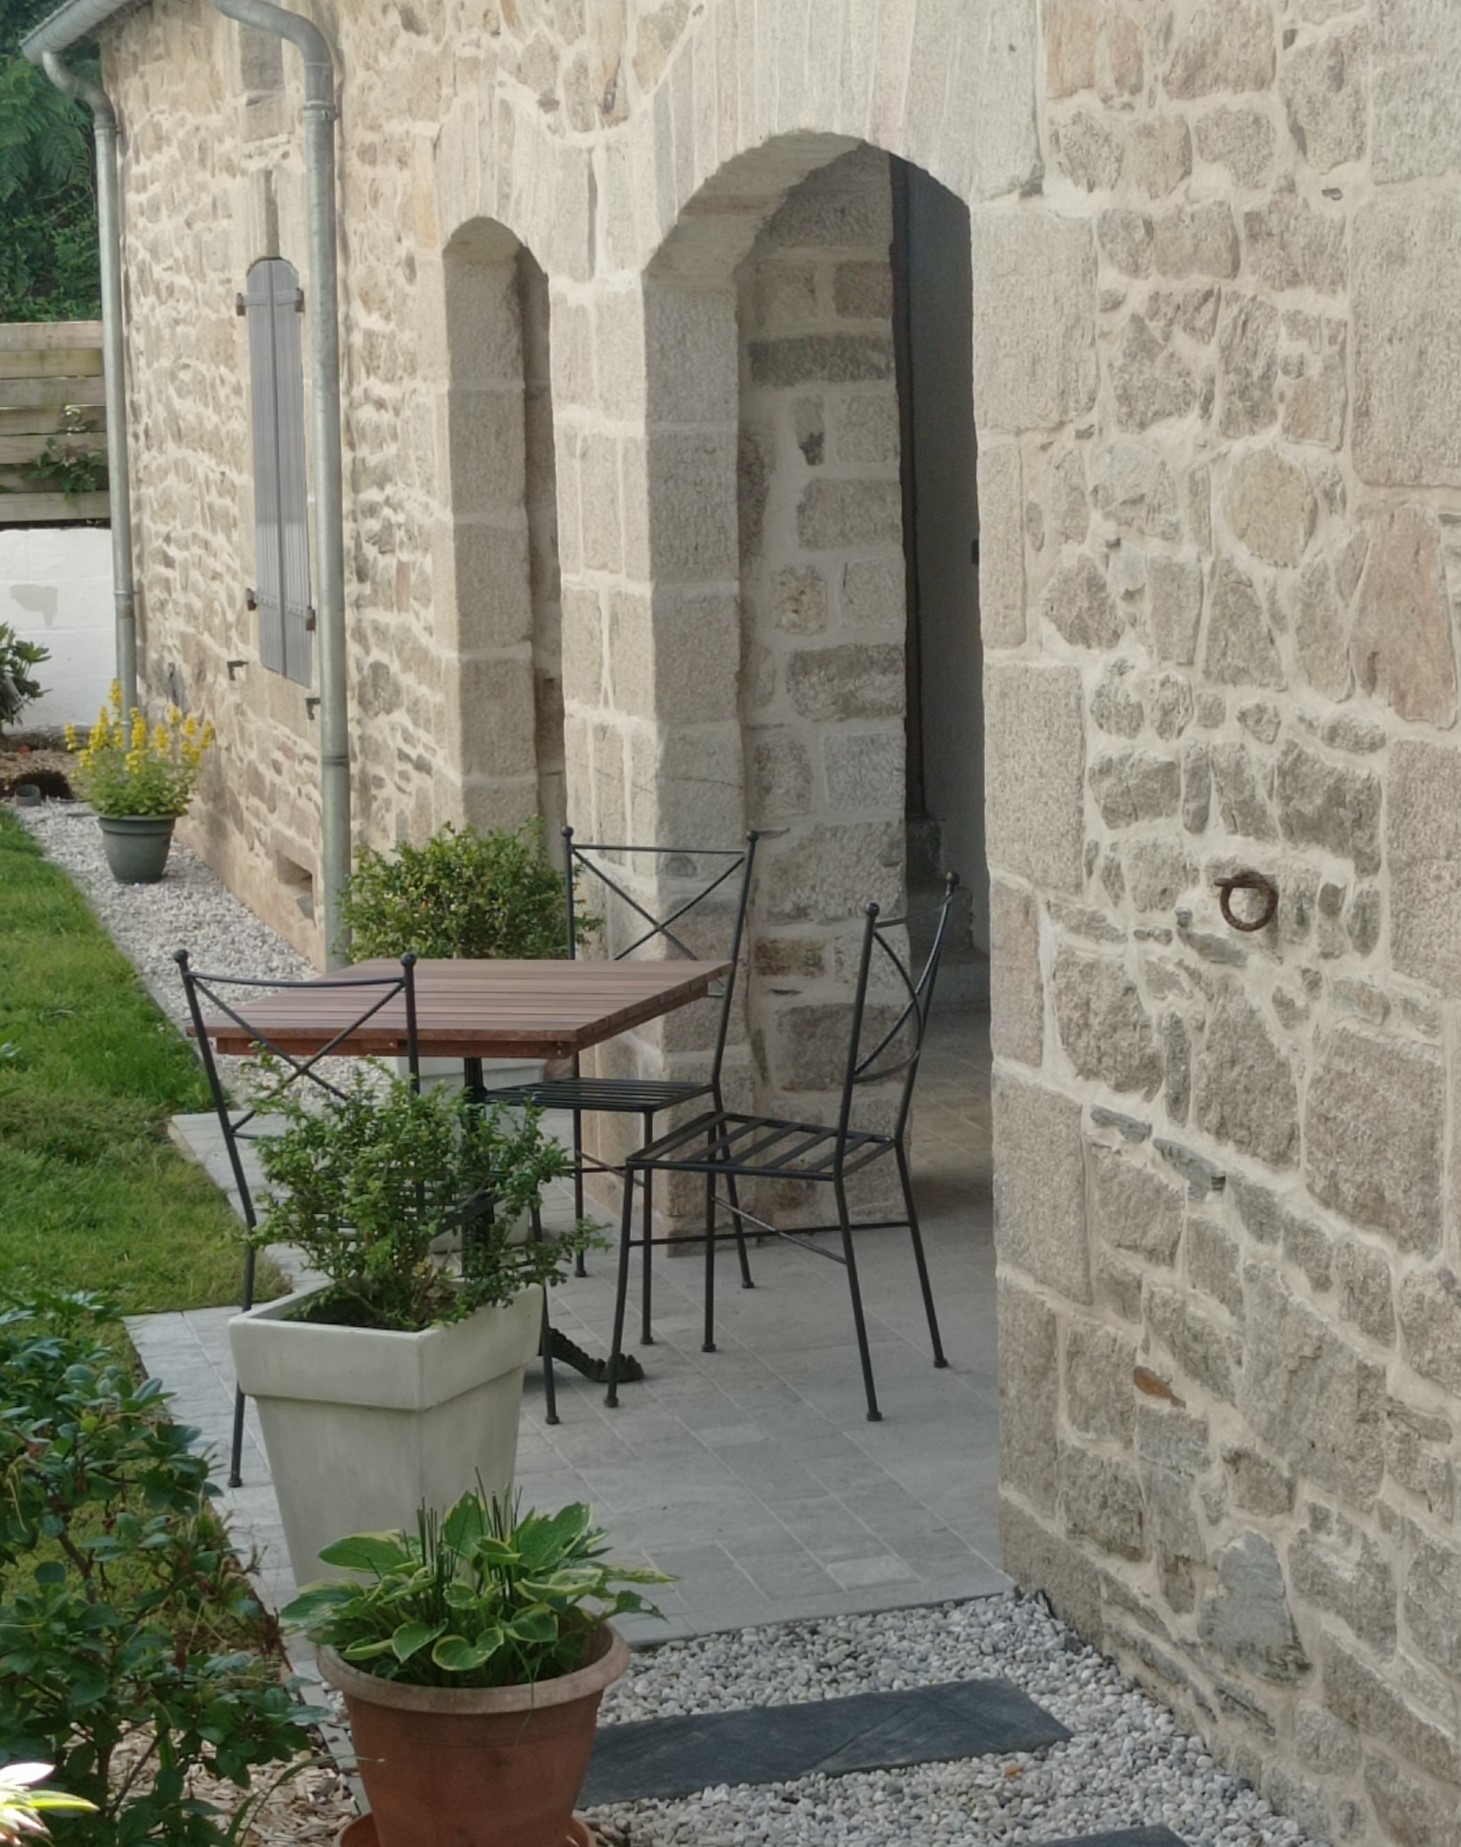 ground floor holiday apartment-accommodation in brittany France